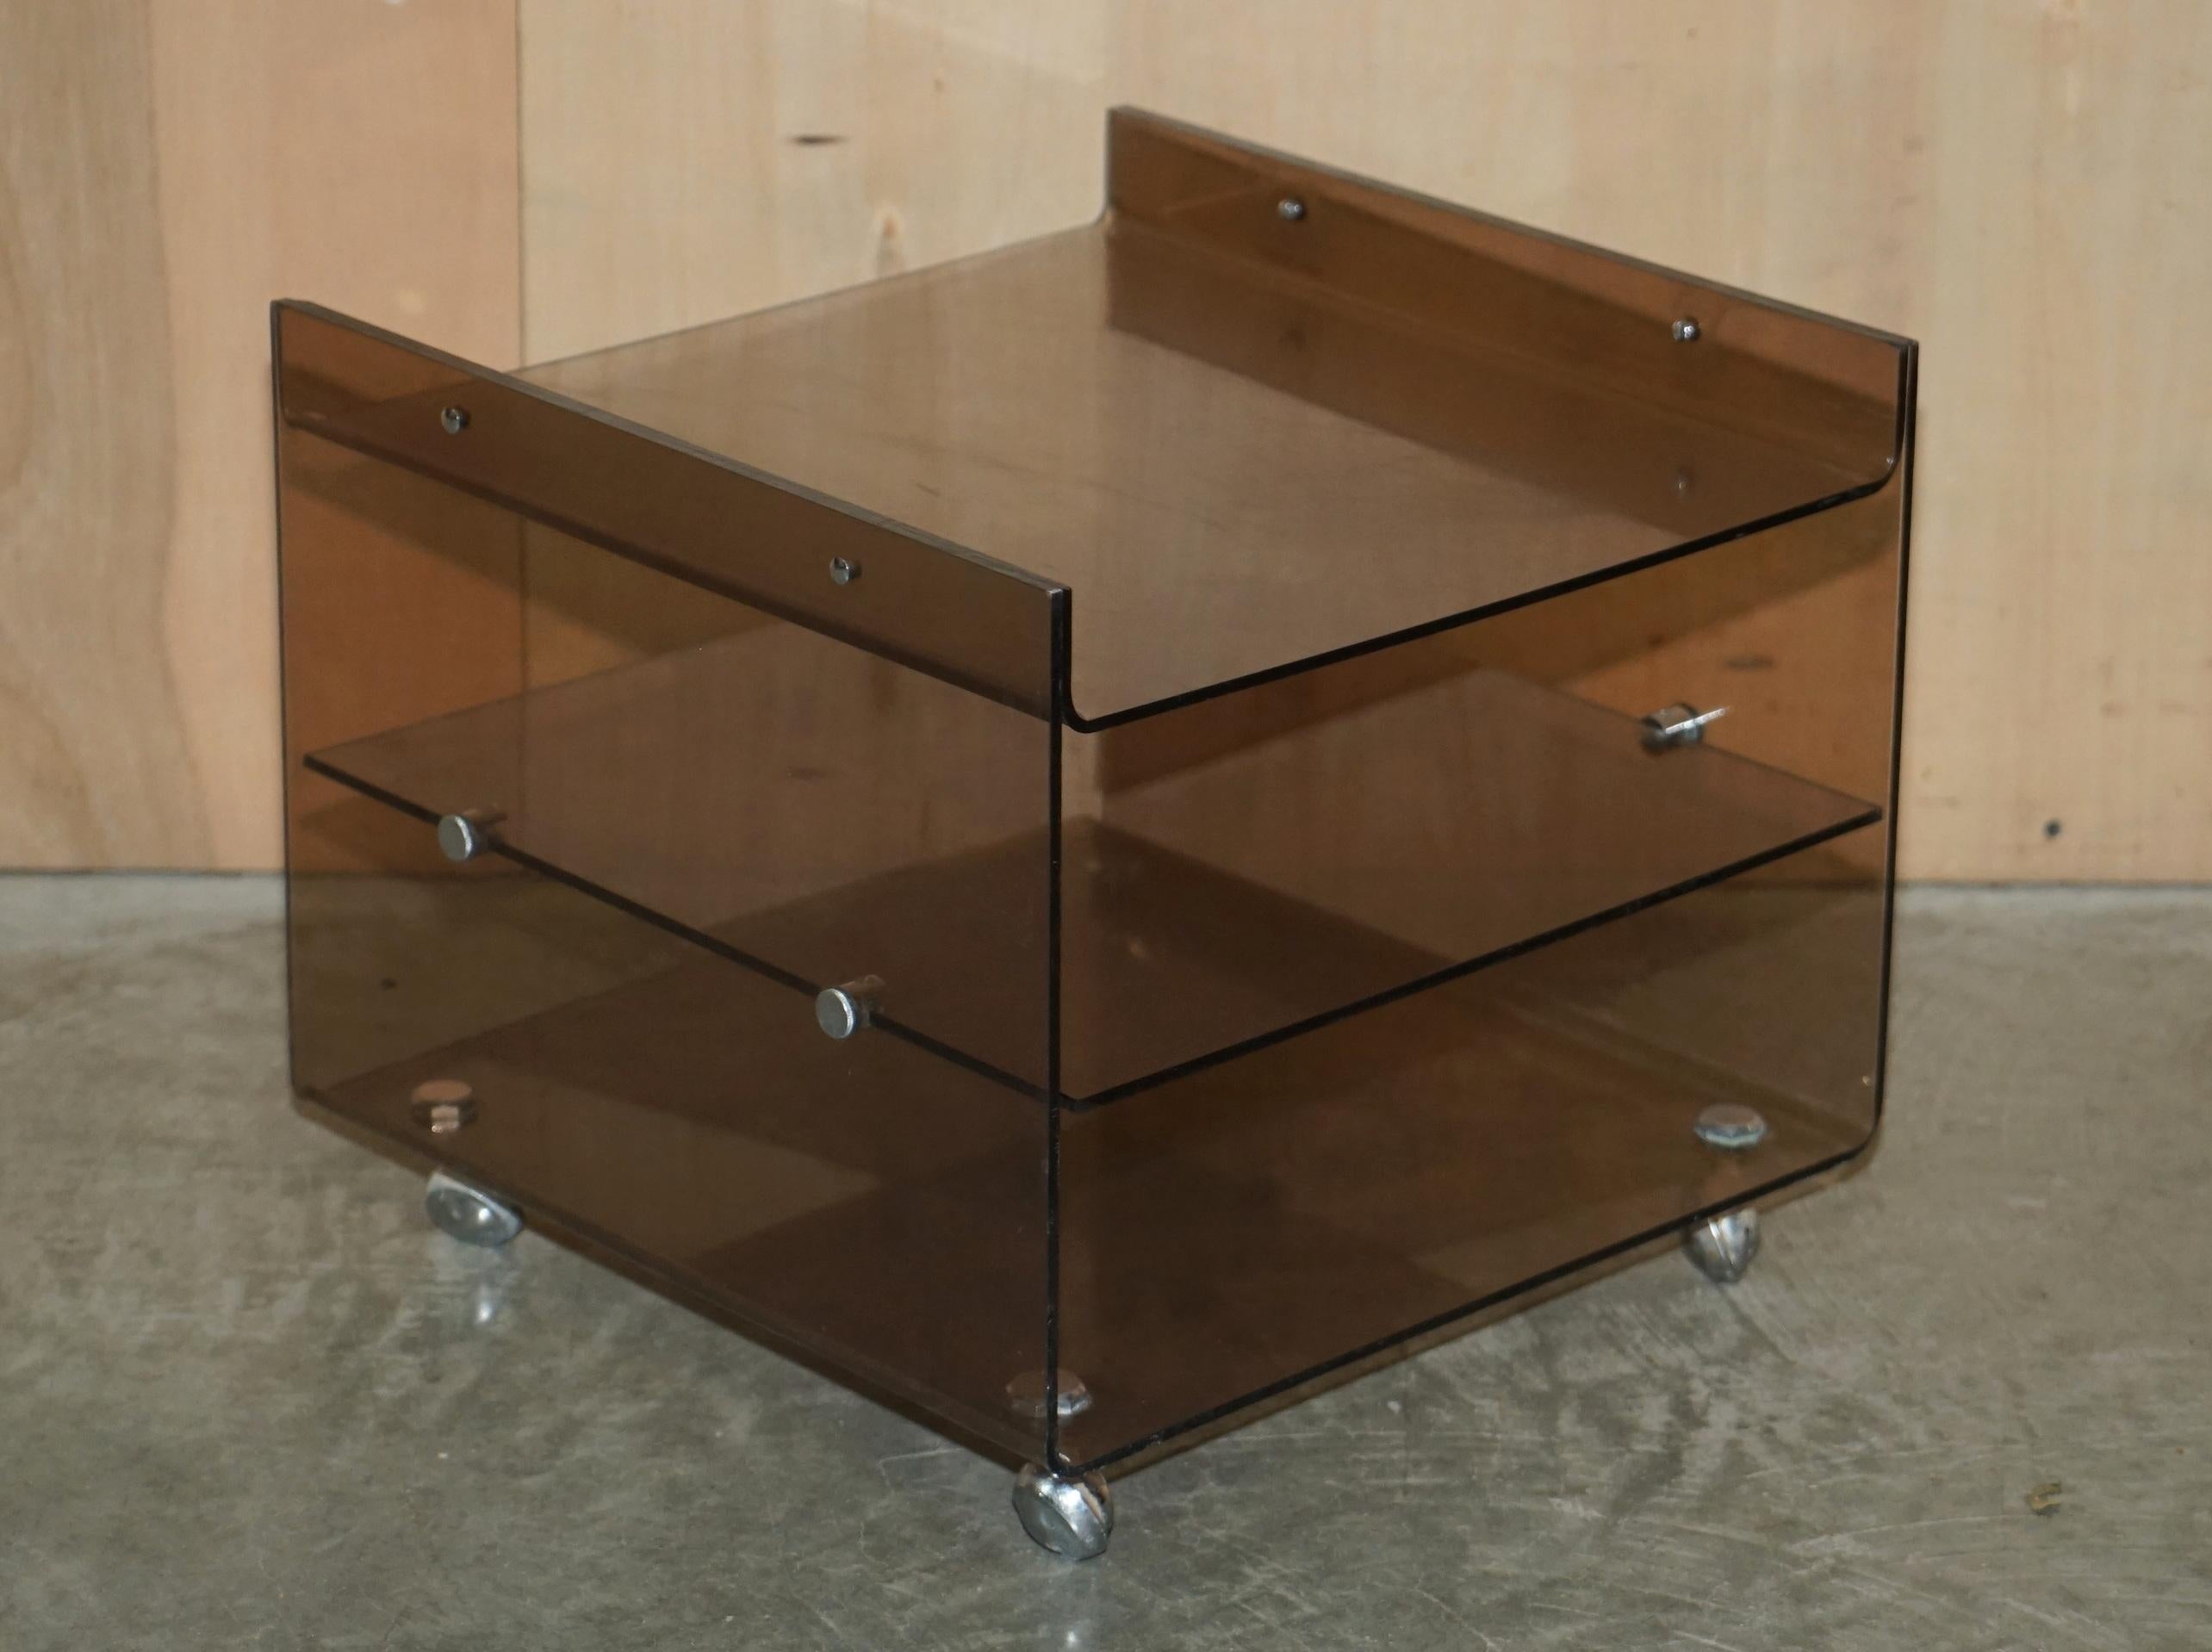 We are delighted to offer for sale this lovely original pair of circa 1960’s Mid-Century Modern plexiglass side tables on the original castors by Eric Maville.

A very cool and well made pair of retro side tables, they look elagent and